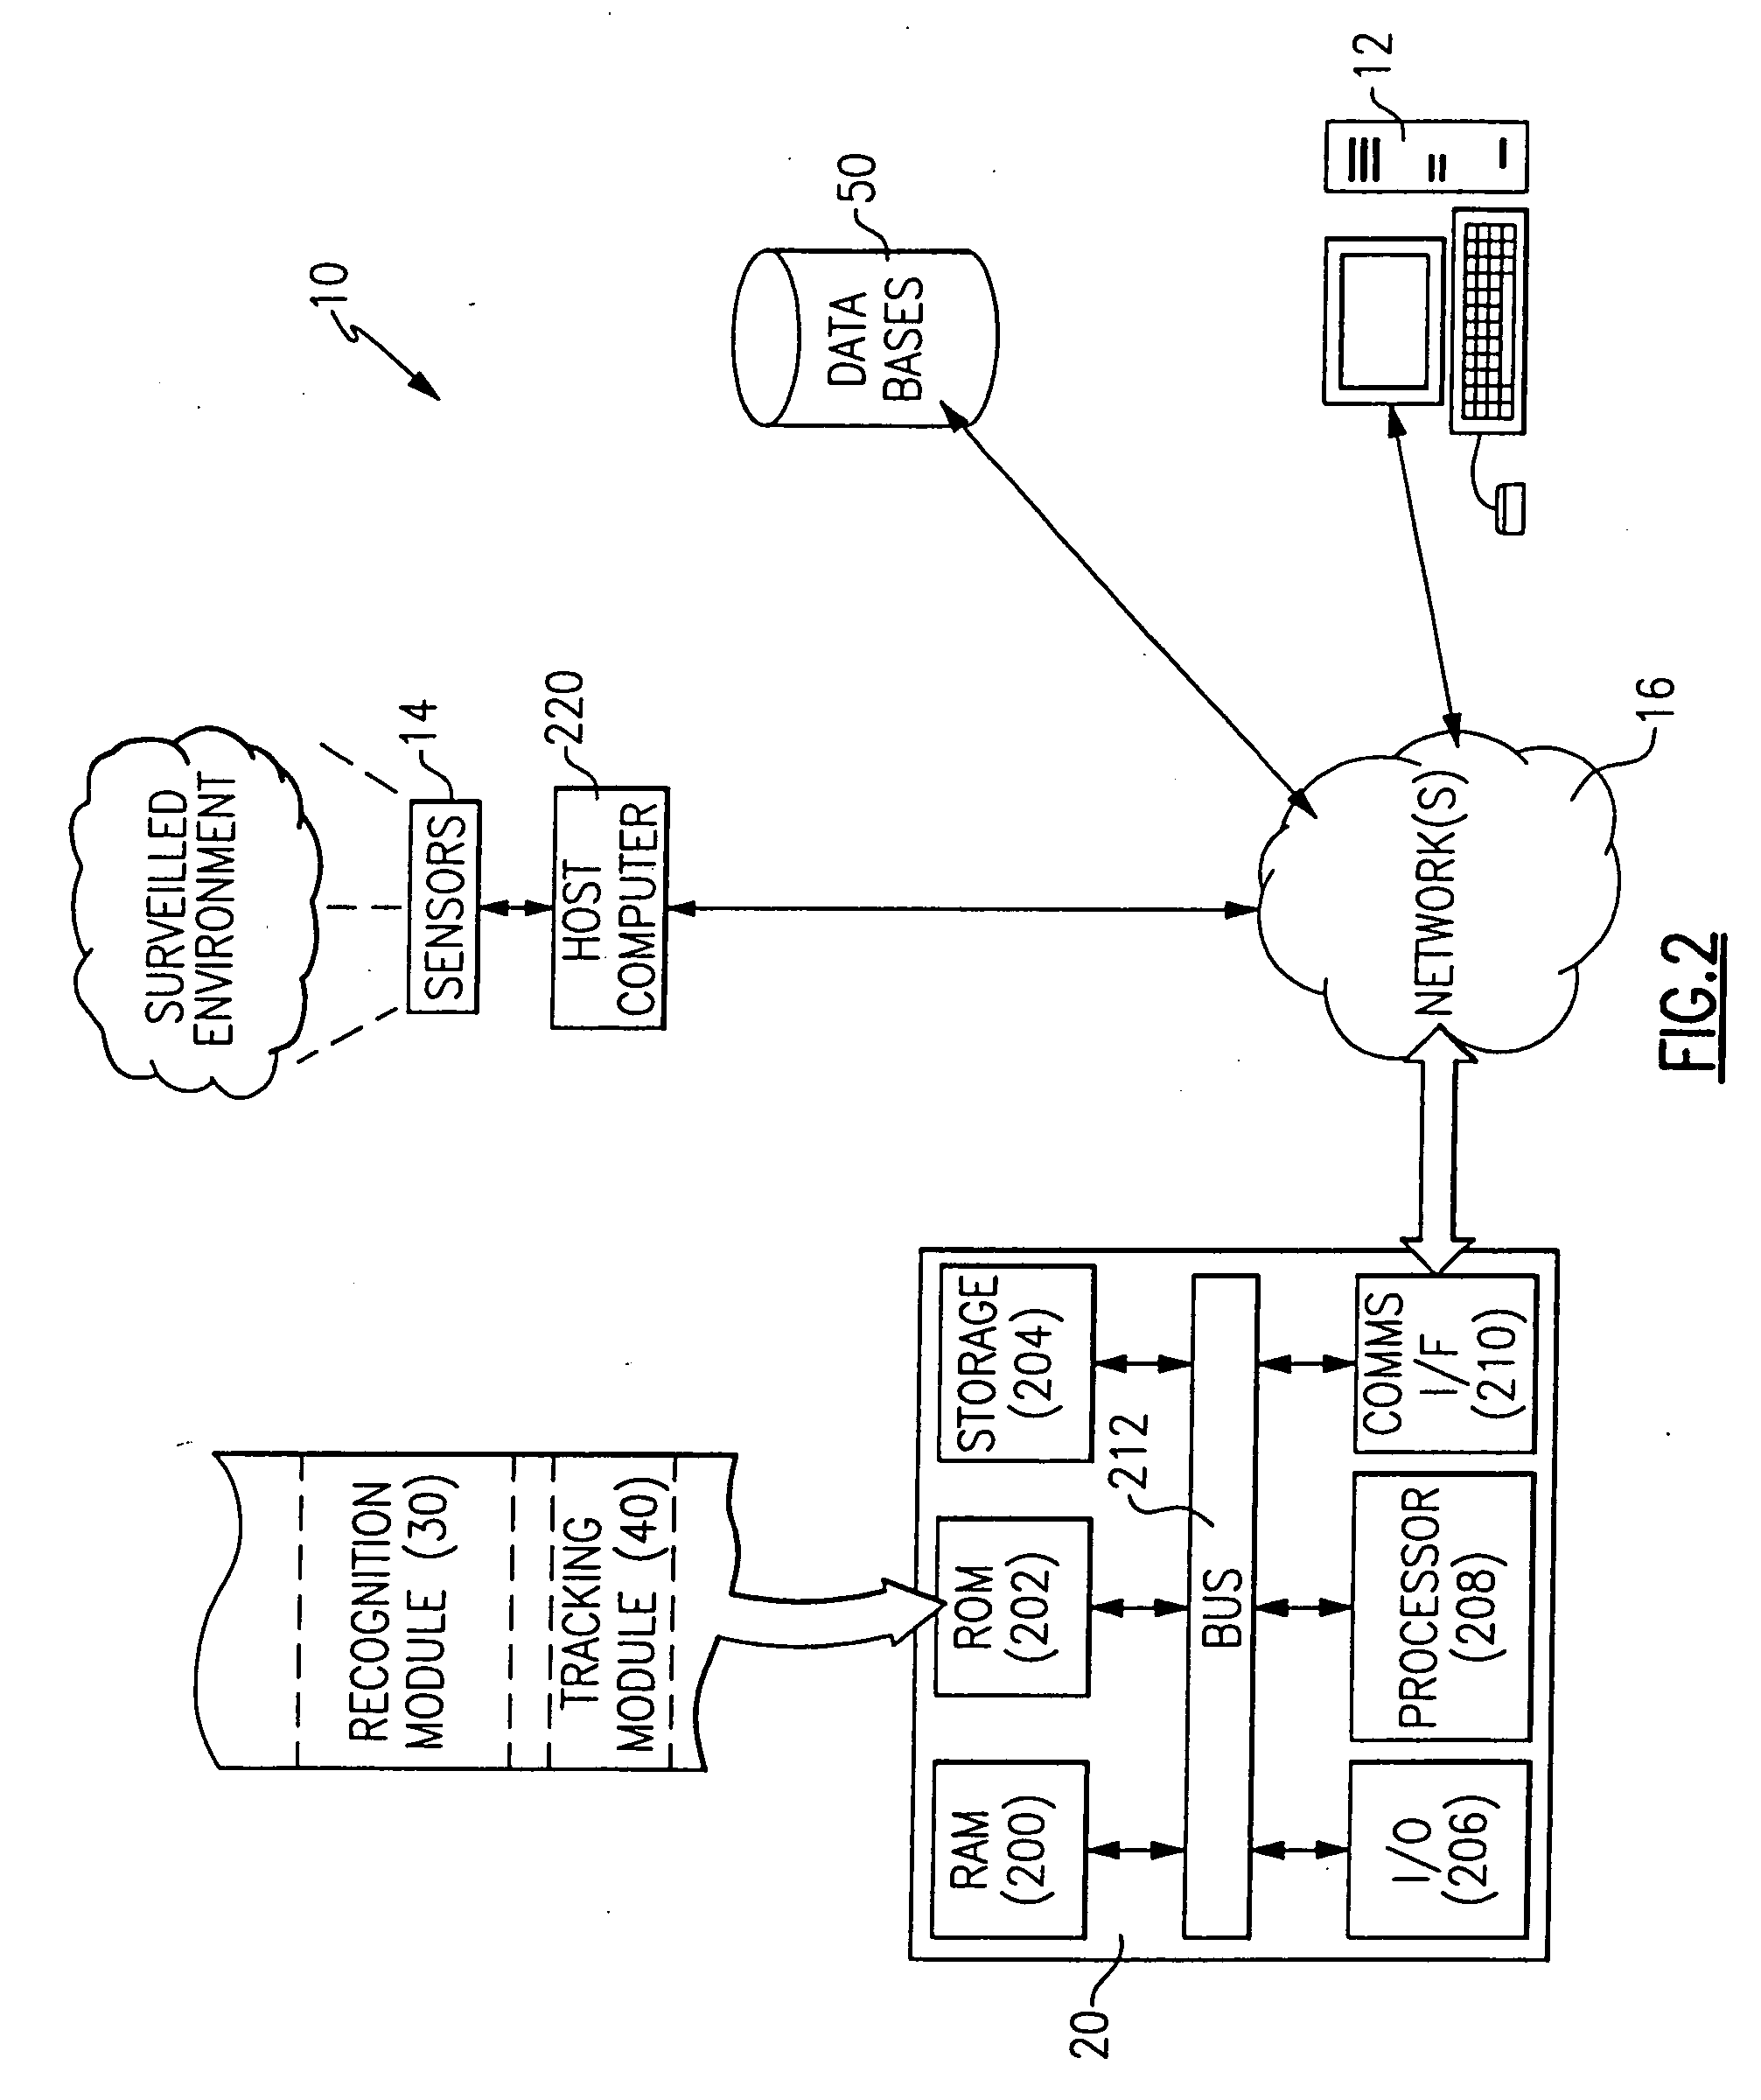 Object recognition system using dynamic length genetic training